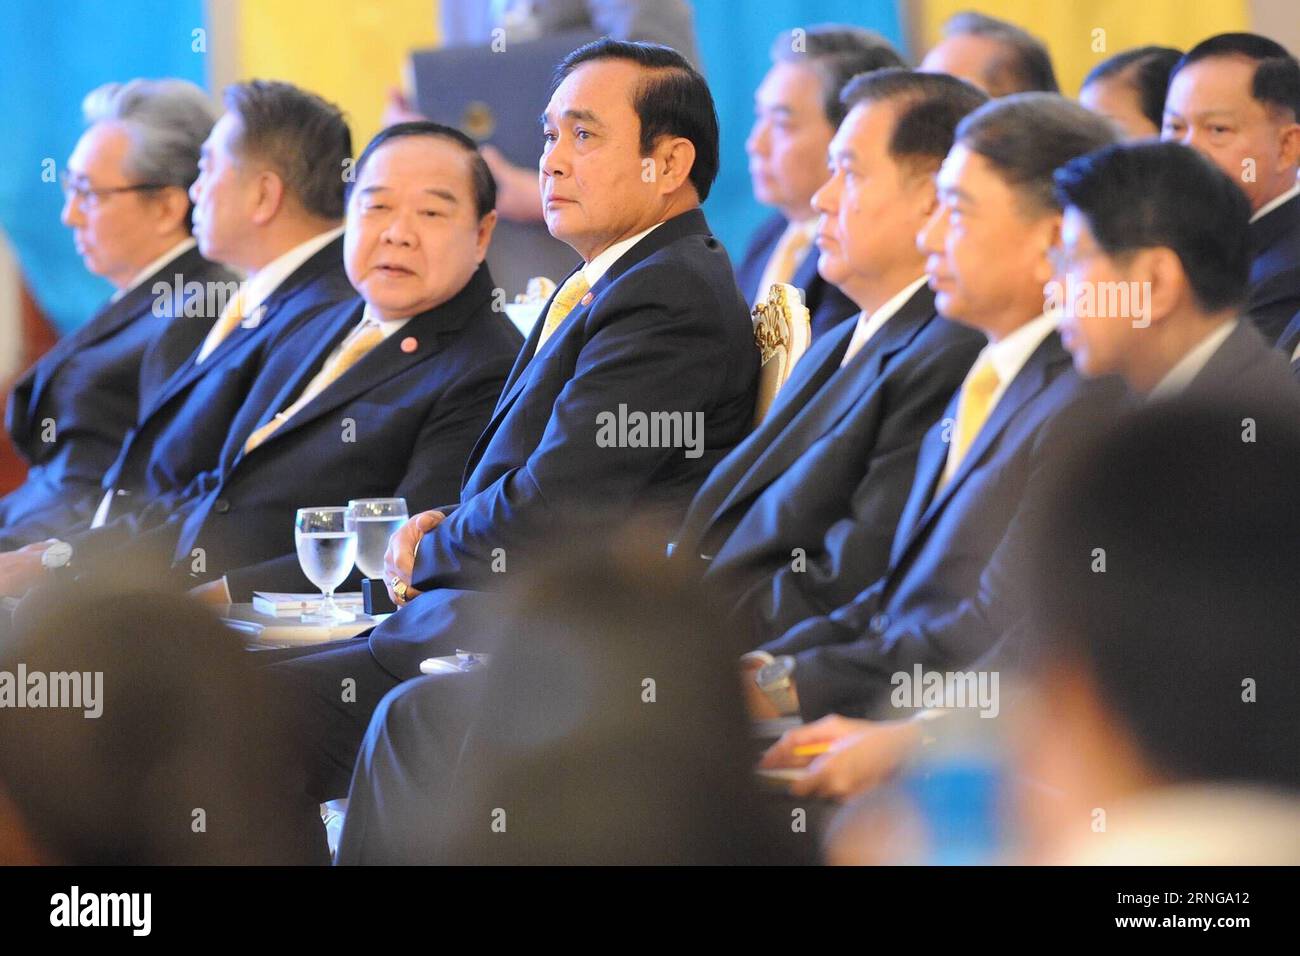 (160915) -- BANGKOK, Sept. 15, 2016 -- Thai Prime Minister Prayut Chan-o-cha (4th L) attends a press conference on the performances of the government during the last two years, at the Thai Government House in Bangkok, capital of Thailand, on Sept. 15, 2016. Thailand could potentially upgrade itself from the long-standing status of a Third World developing country to a First World developed country, Thai Prime Minister Prayut Chan-o-cha said on Thursday. ) (syq) THAILAND-BANGKOK-PM-PRESS CONFERENCE RachenxSageamsak PUBLICATIONxNOTxINxCHN   160915 Bangkok Sept 15 2016 Thai Prime Ministers Prayut Stock Photo